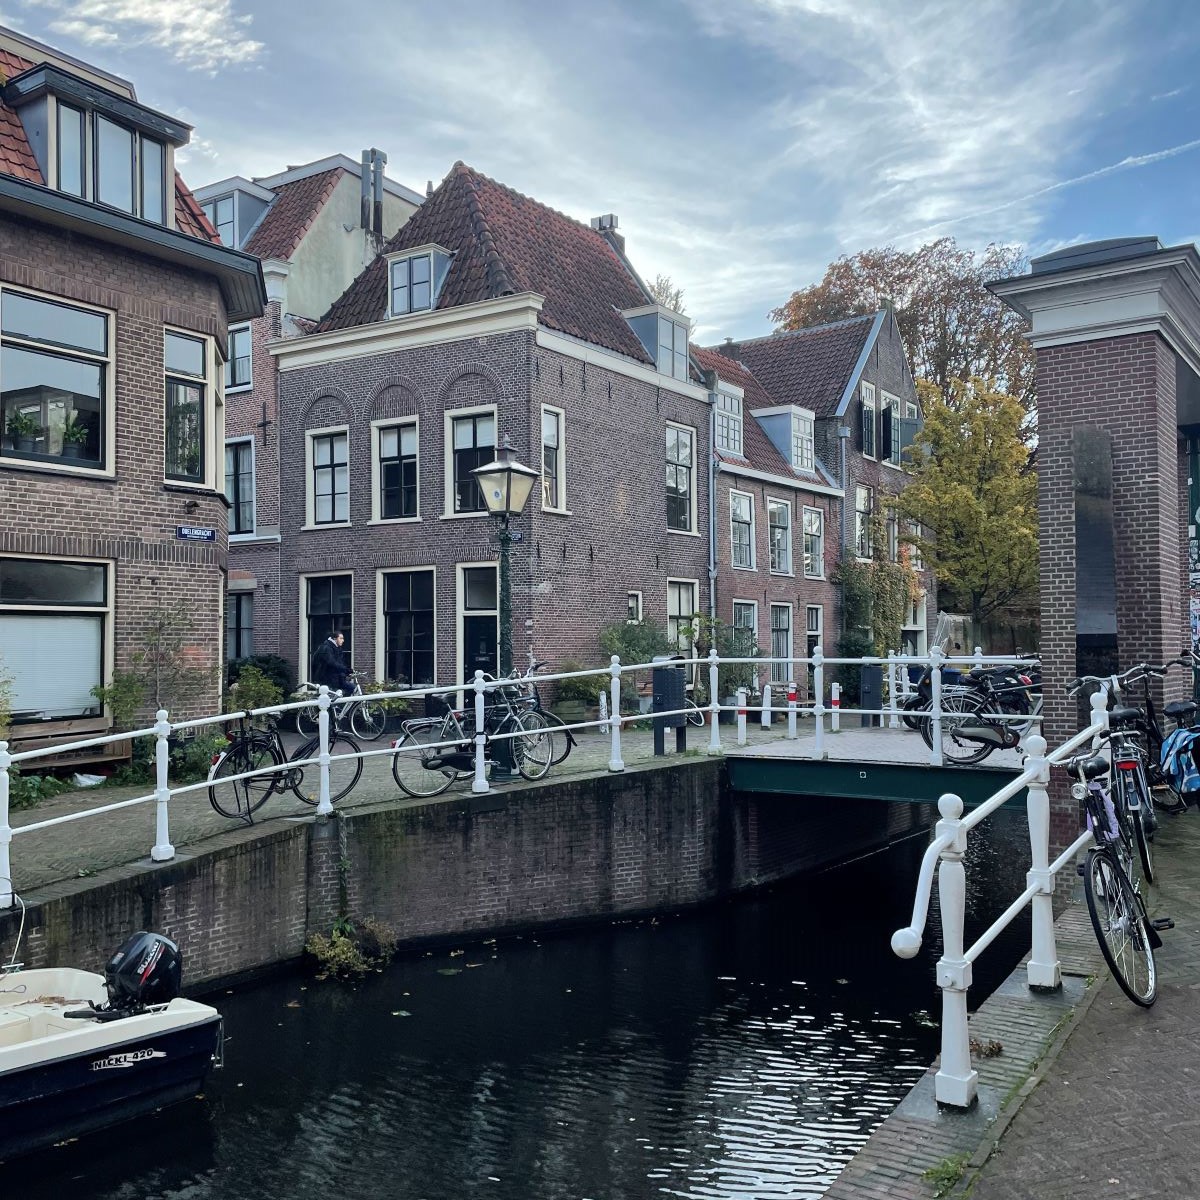 Dutch town with canal